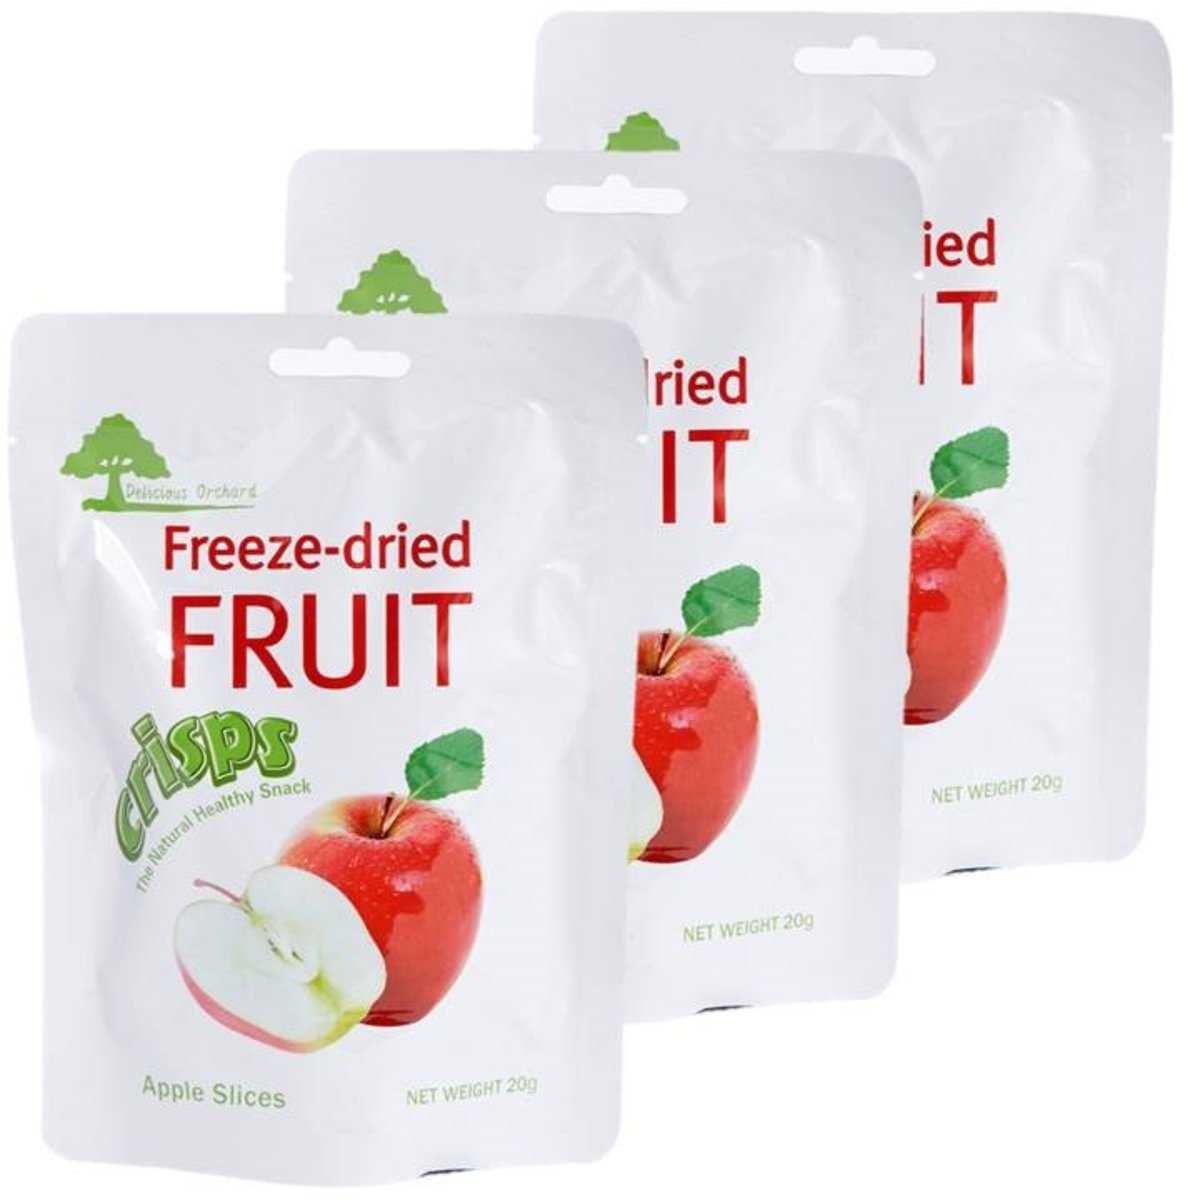 Freeze-dried Apple Slices (No Sugar Added) x3